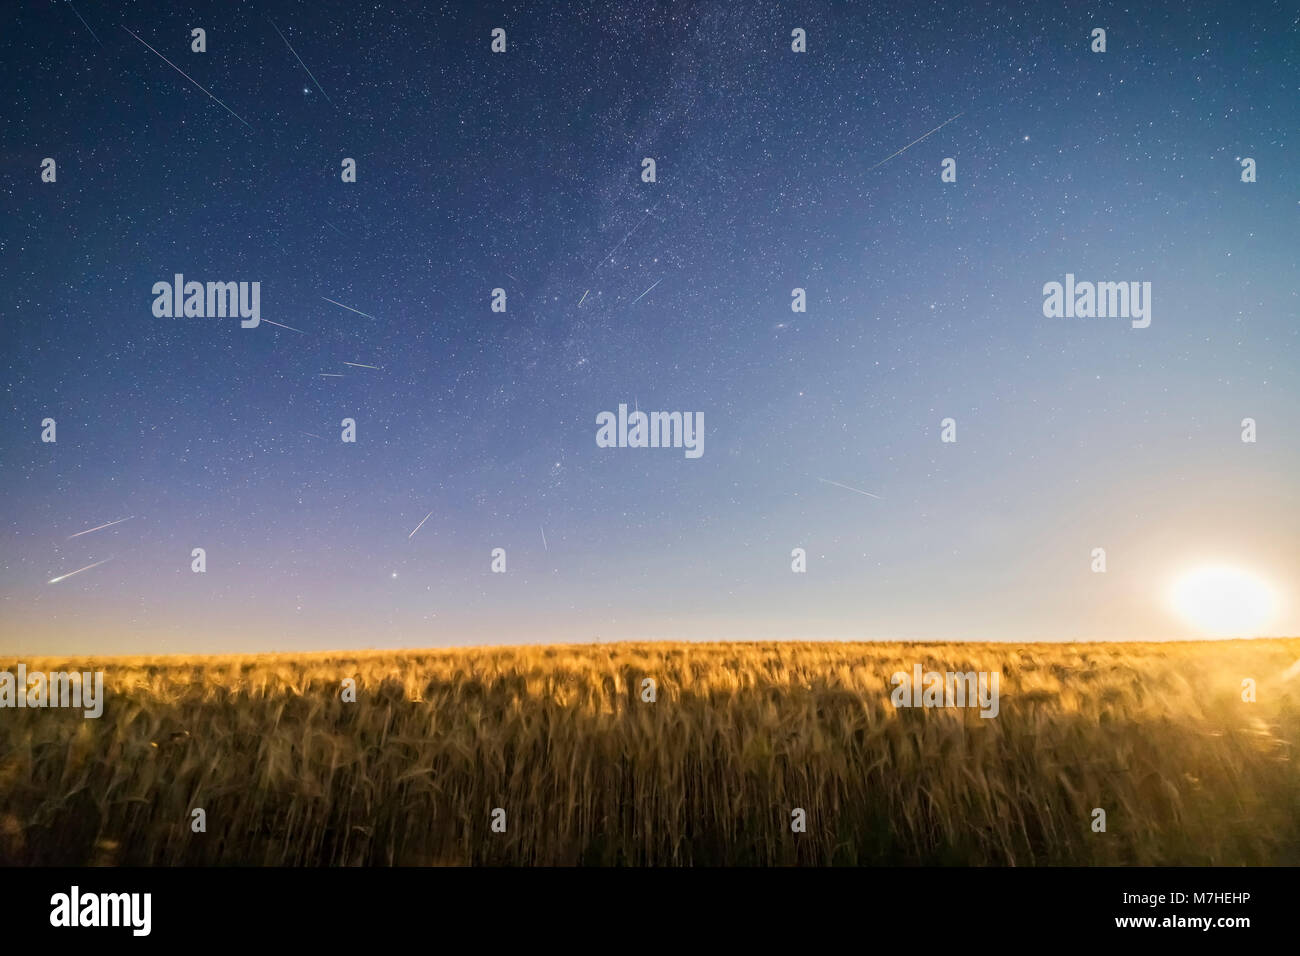 Perseid meteor shower over a moonlight wheat field in Canada. Stock Photo